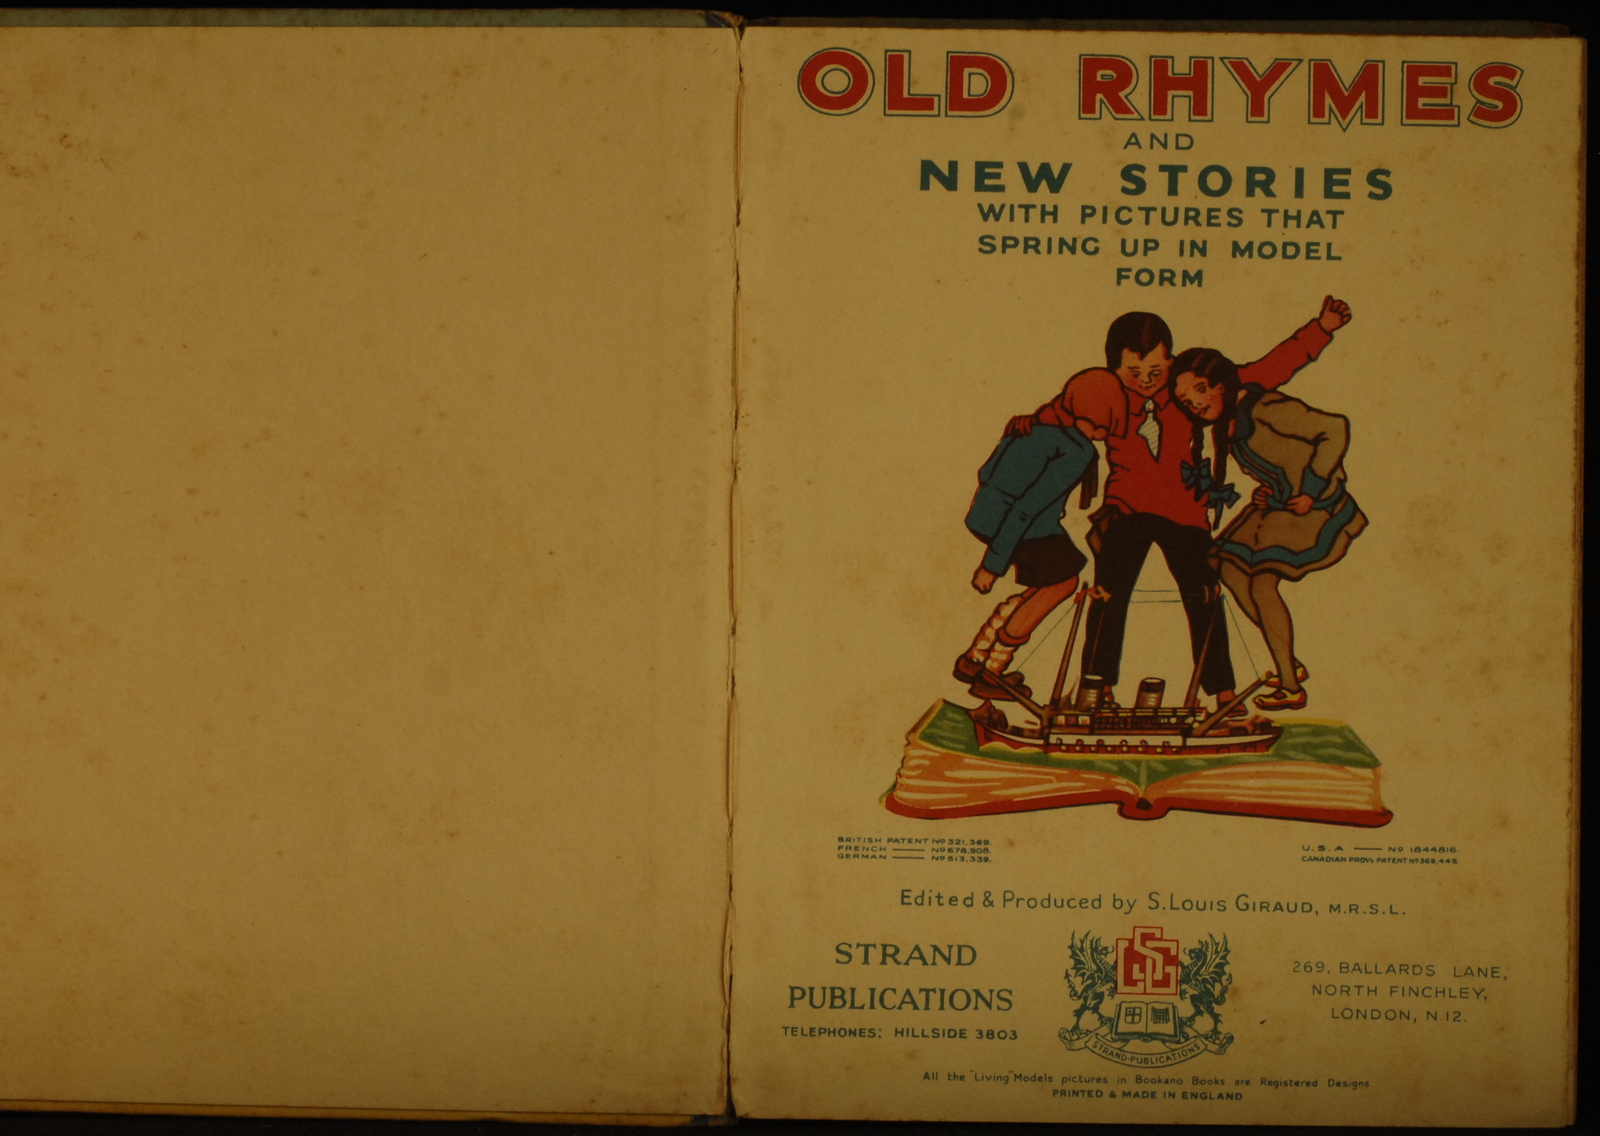 mbb003156e_-_Giraud_Louis_S_-_Old_Rhymes_And_New_Stories.No.1_-_E_DACOSTA.jpg